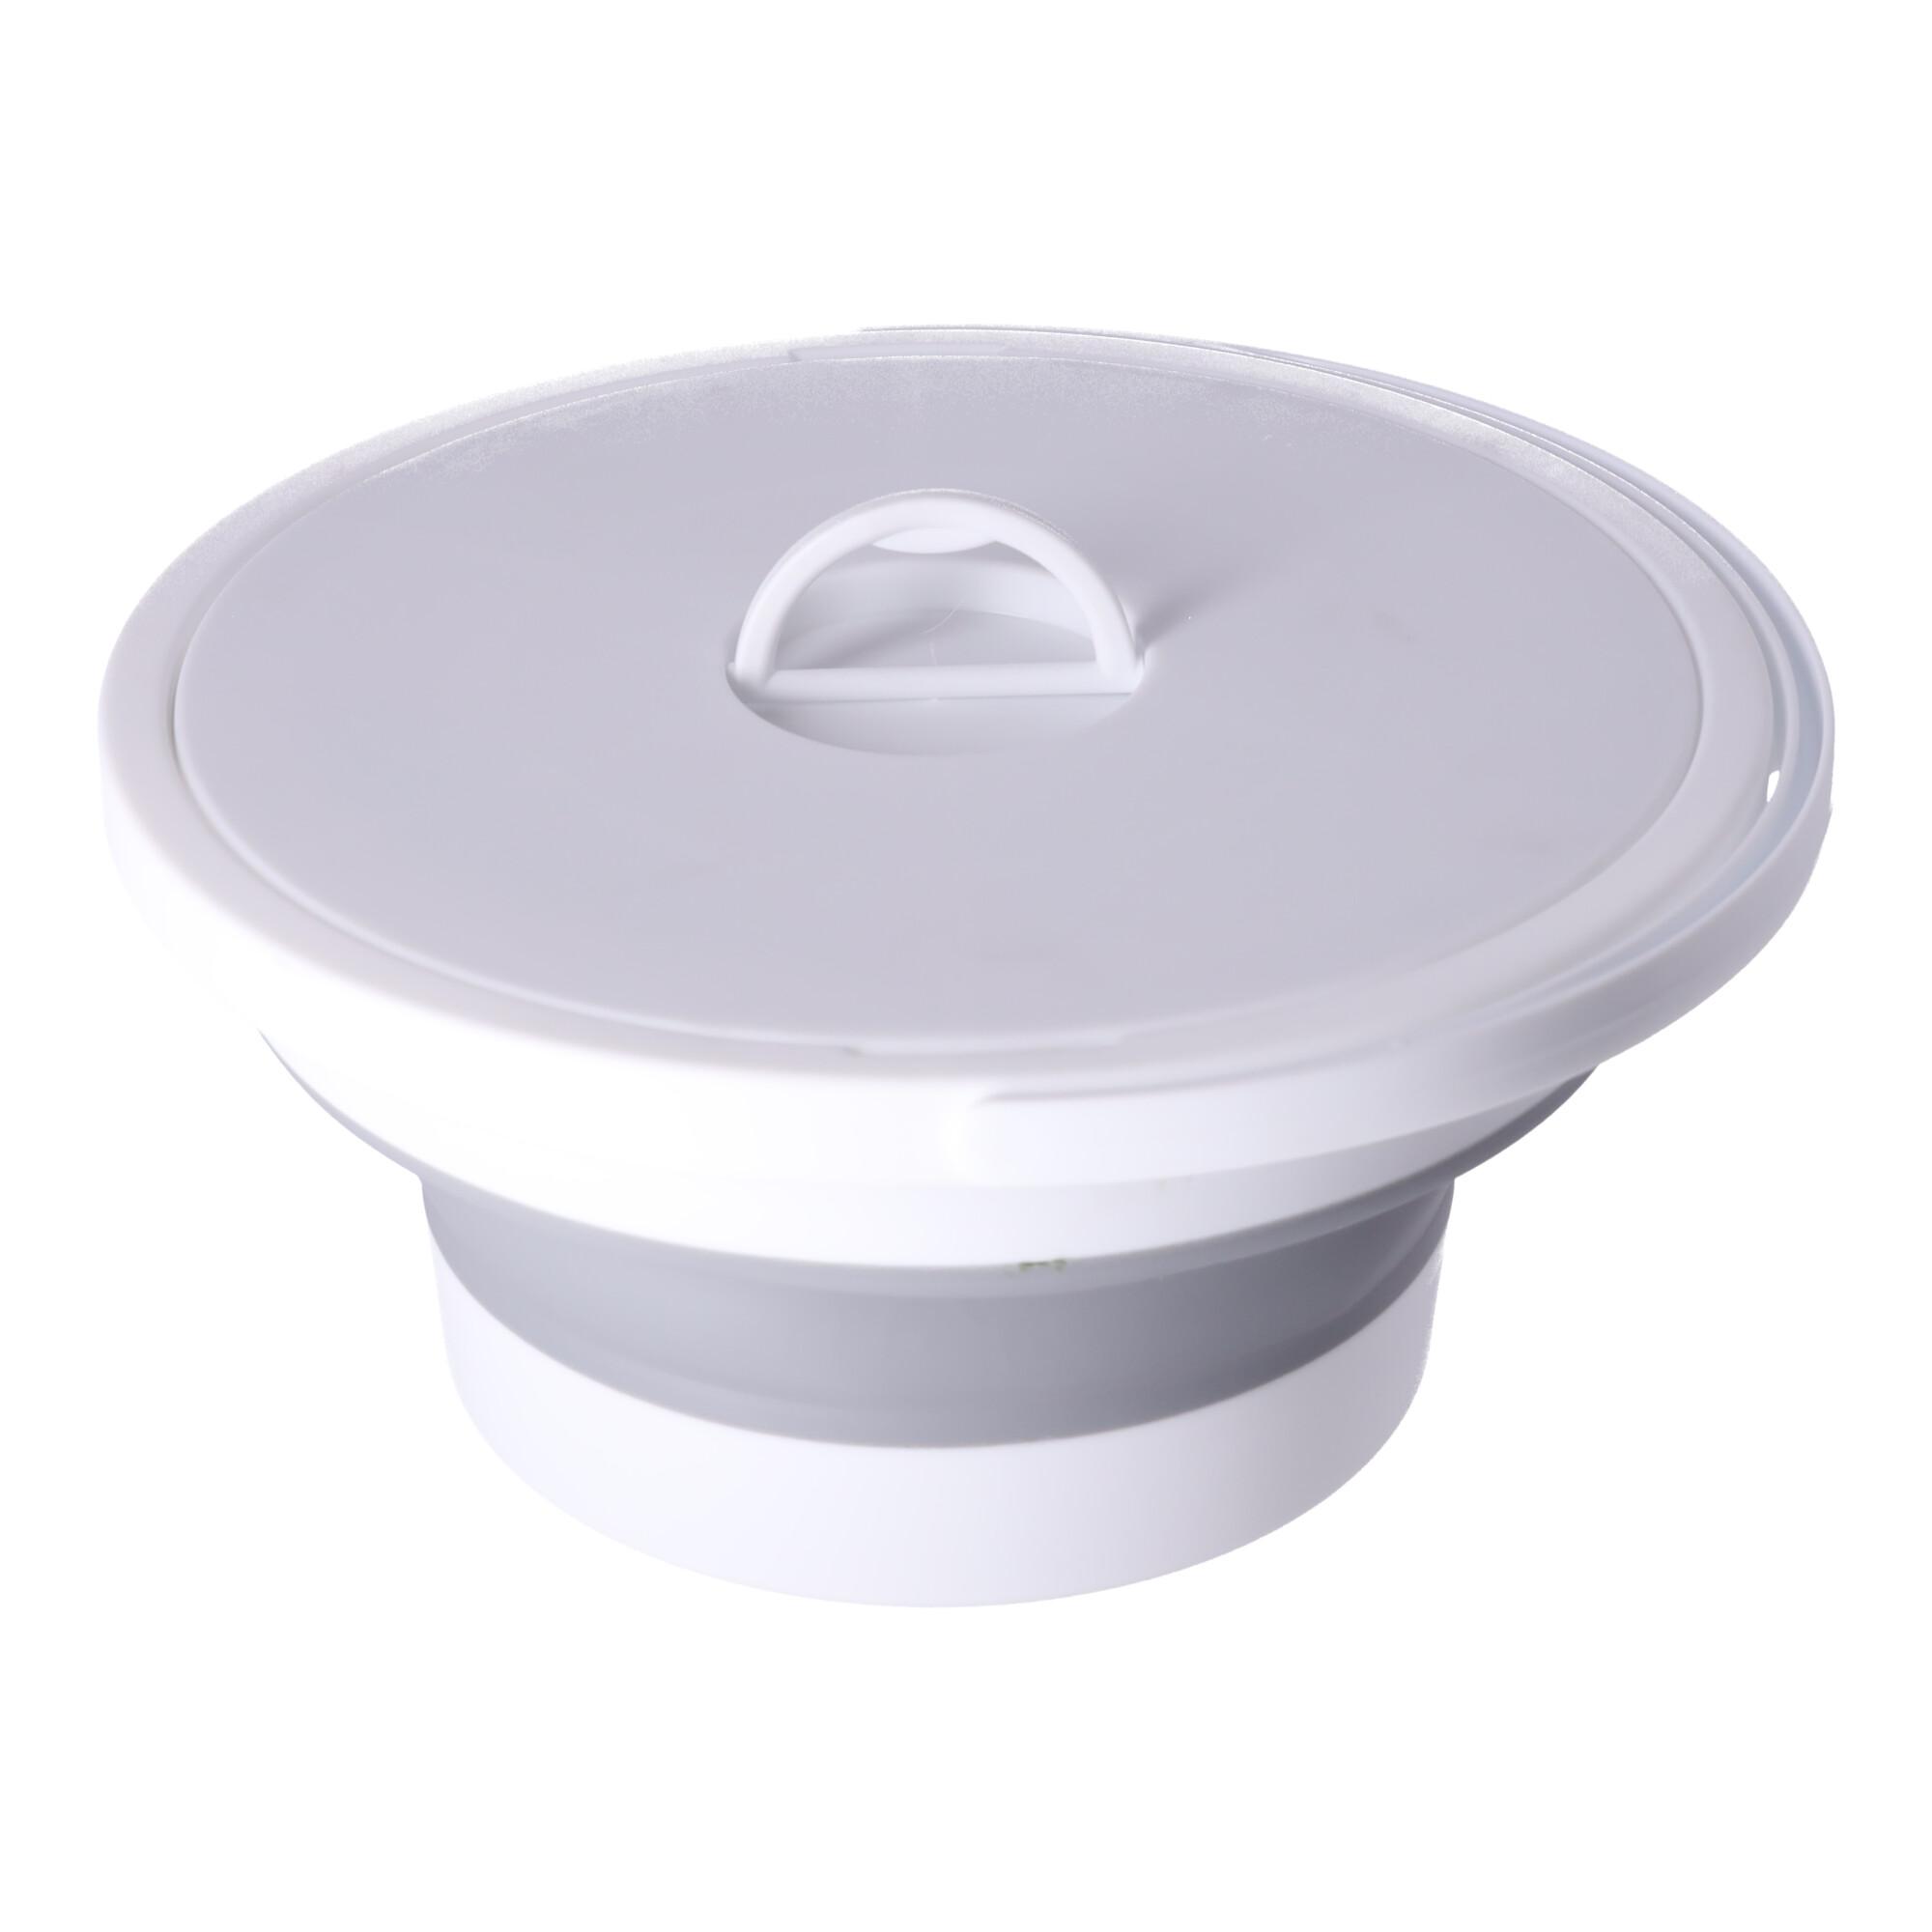 Silicone bucket 15L foldable - grey and white (with a lid)